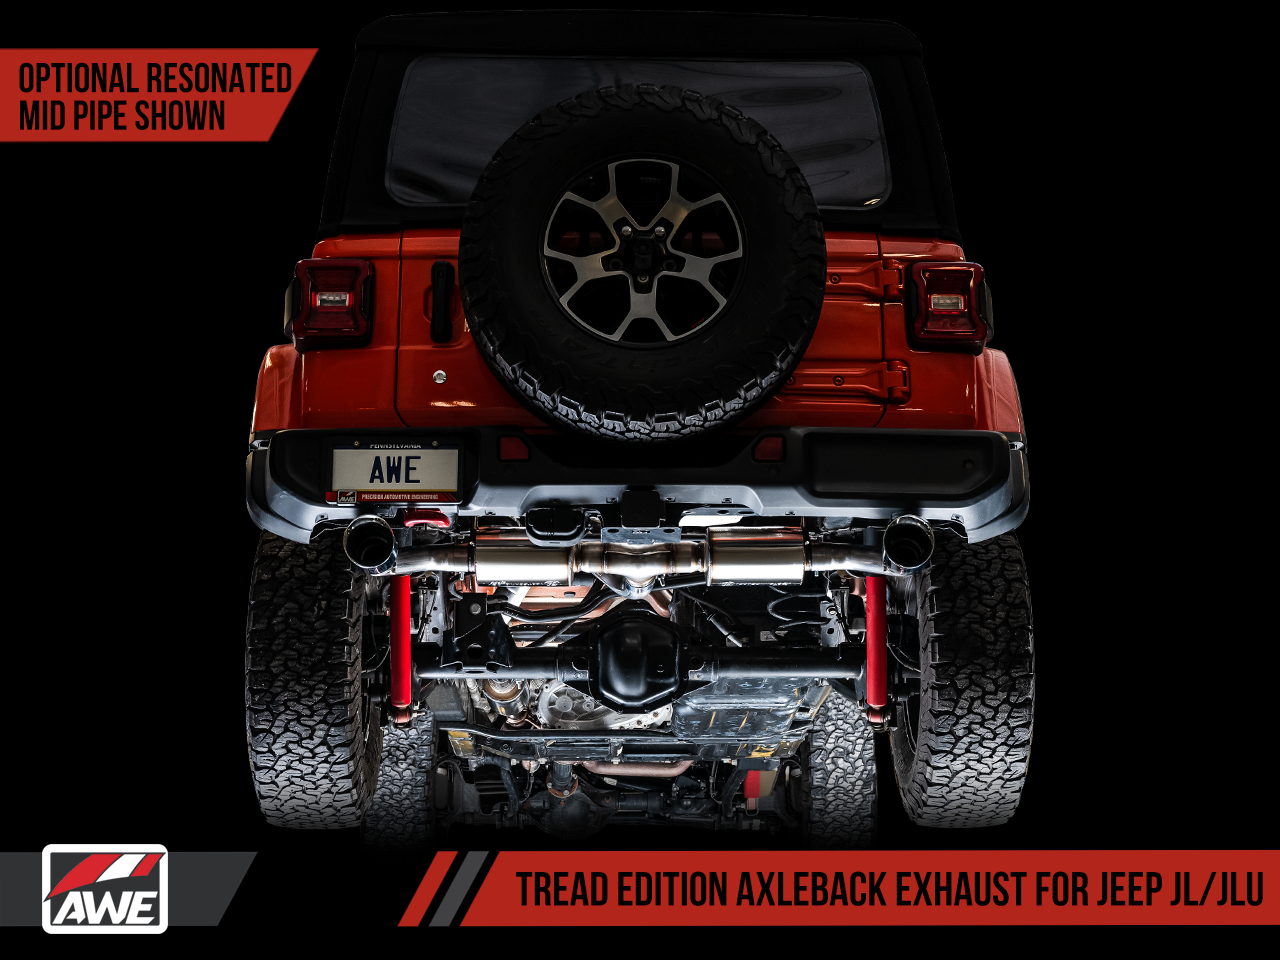 AWE Exhaust Suite for the 2.0T Jeep JL/JLU Wrangler